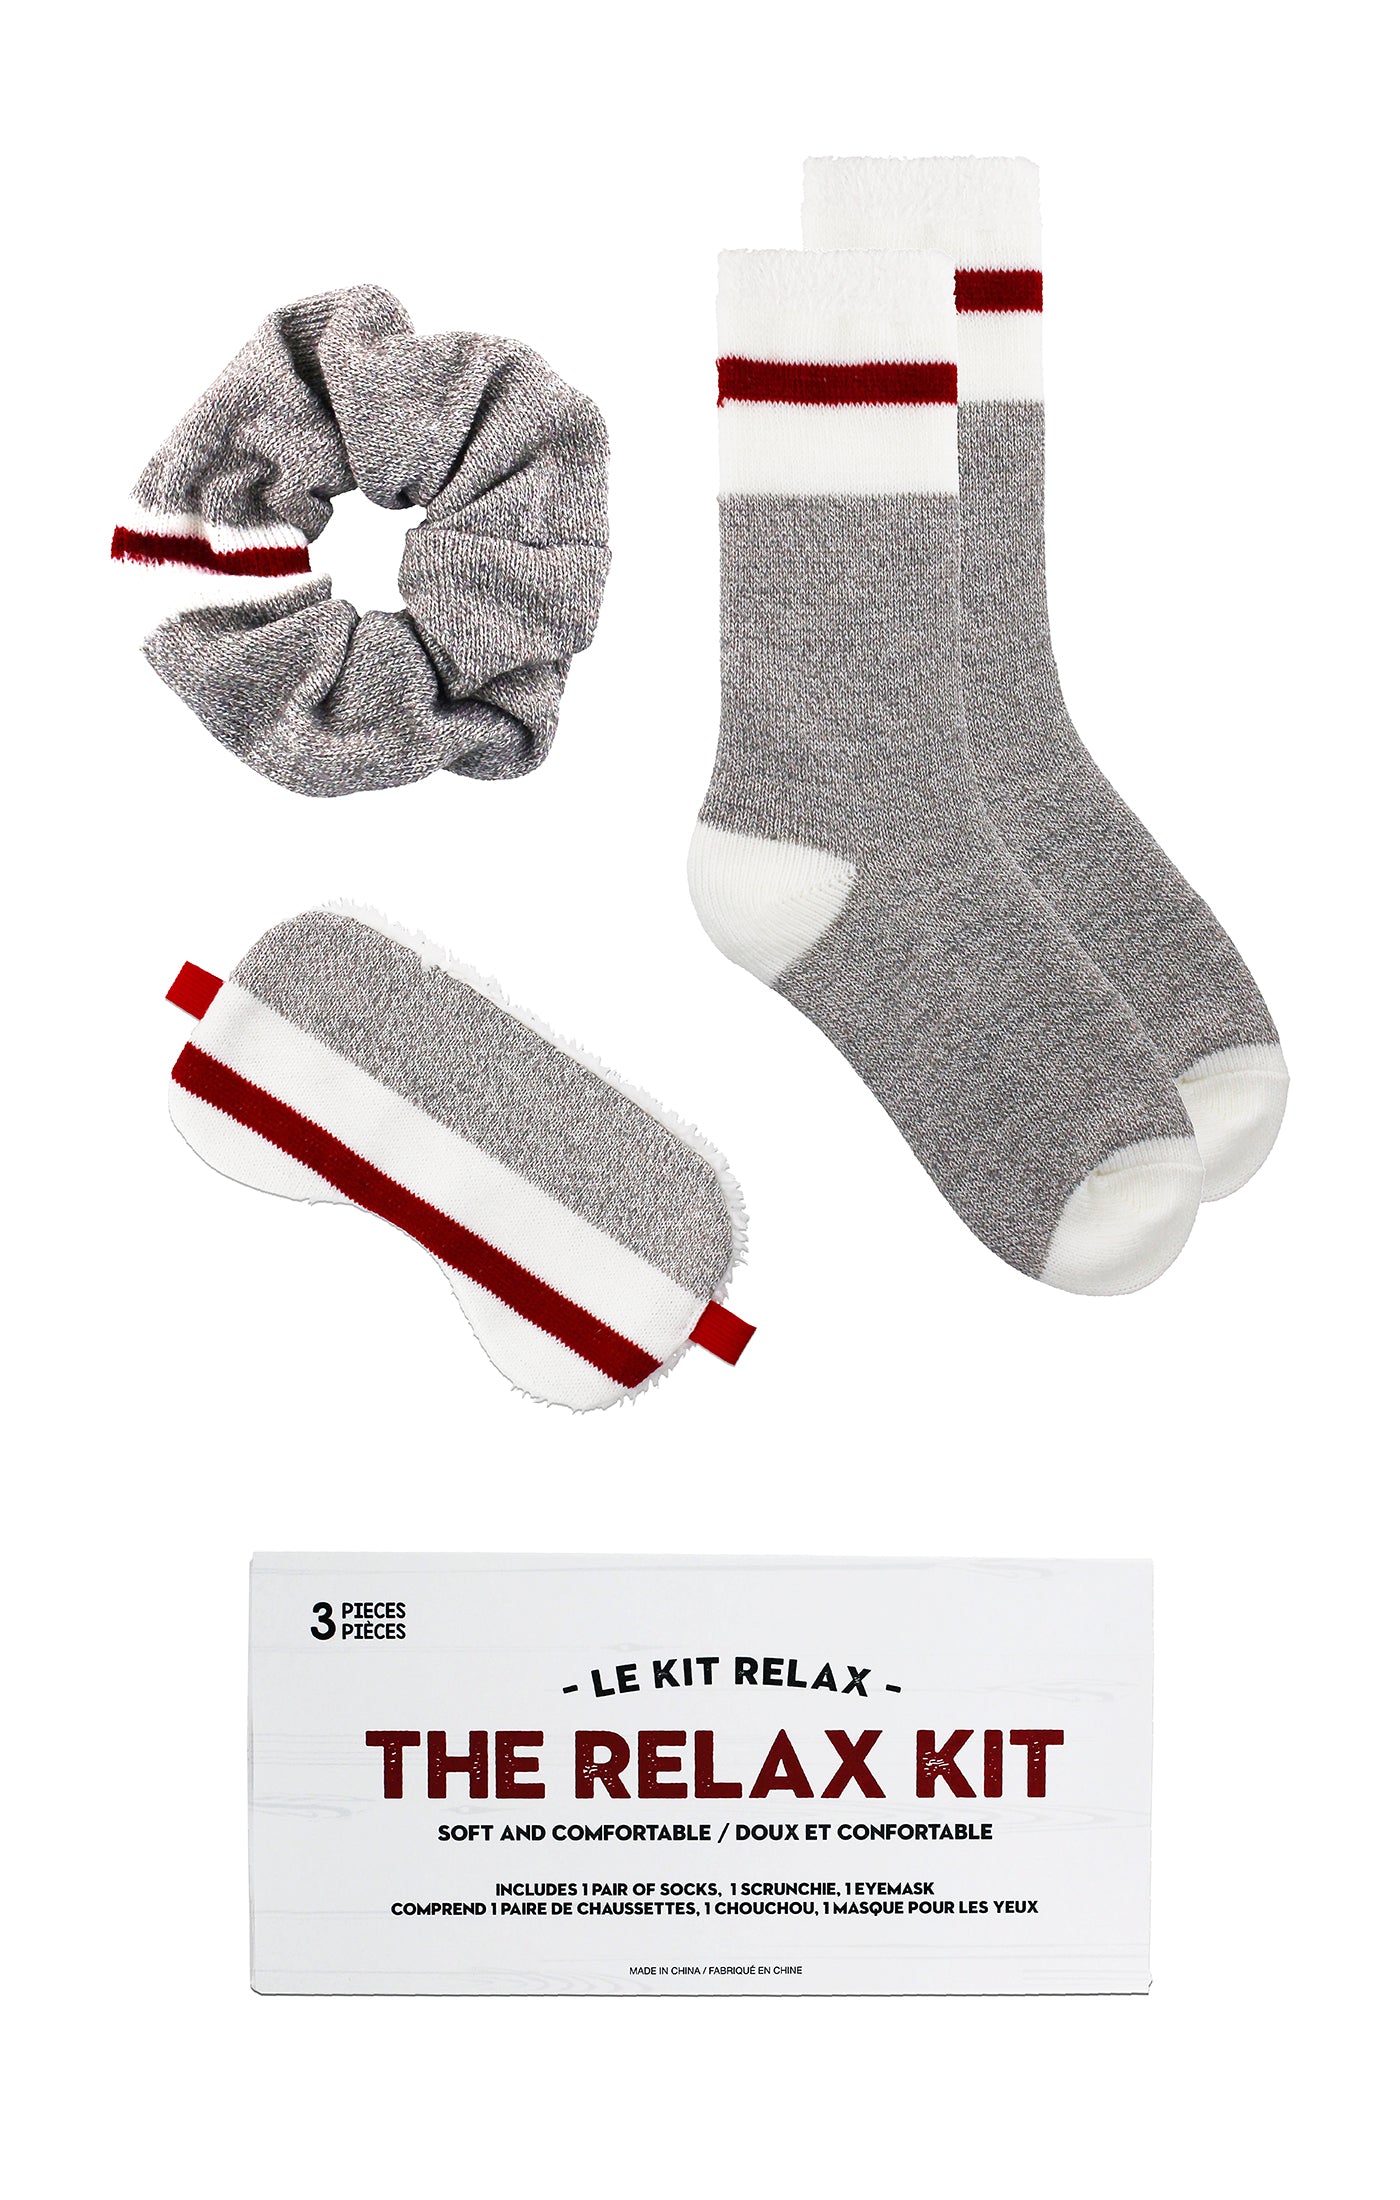 The Relax Kit